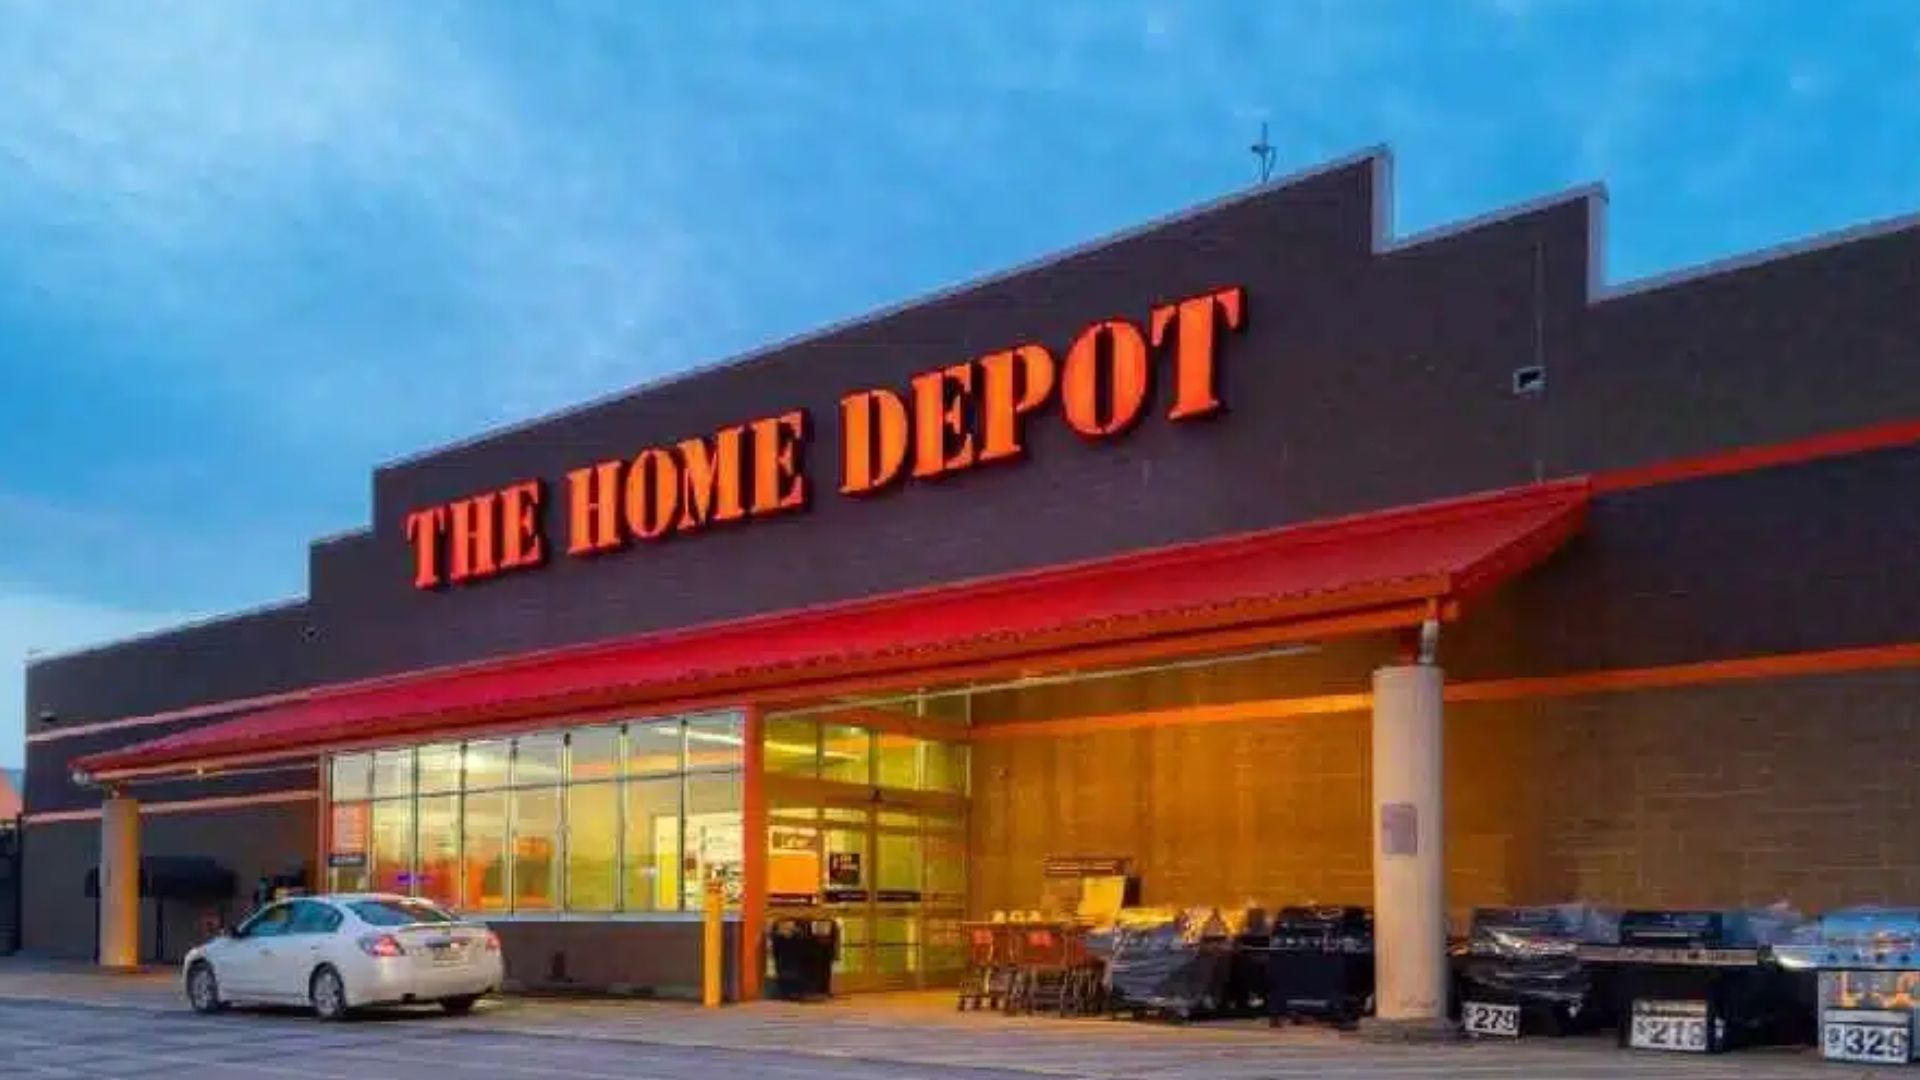 ¡The Home Depot adquiere SRS Distribution por $18.25 mil millones!